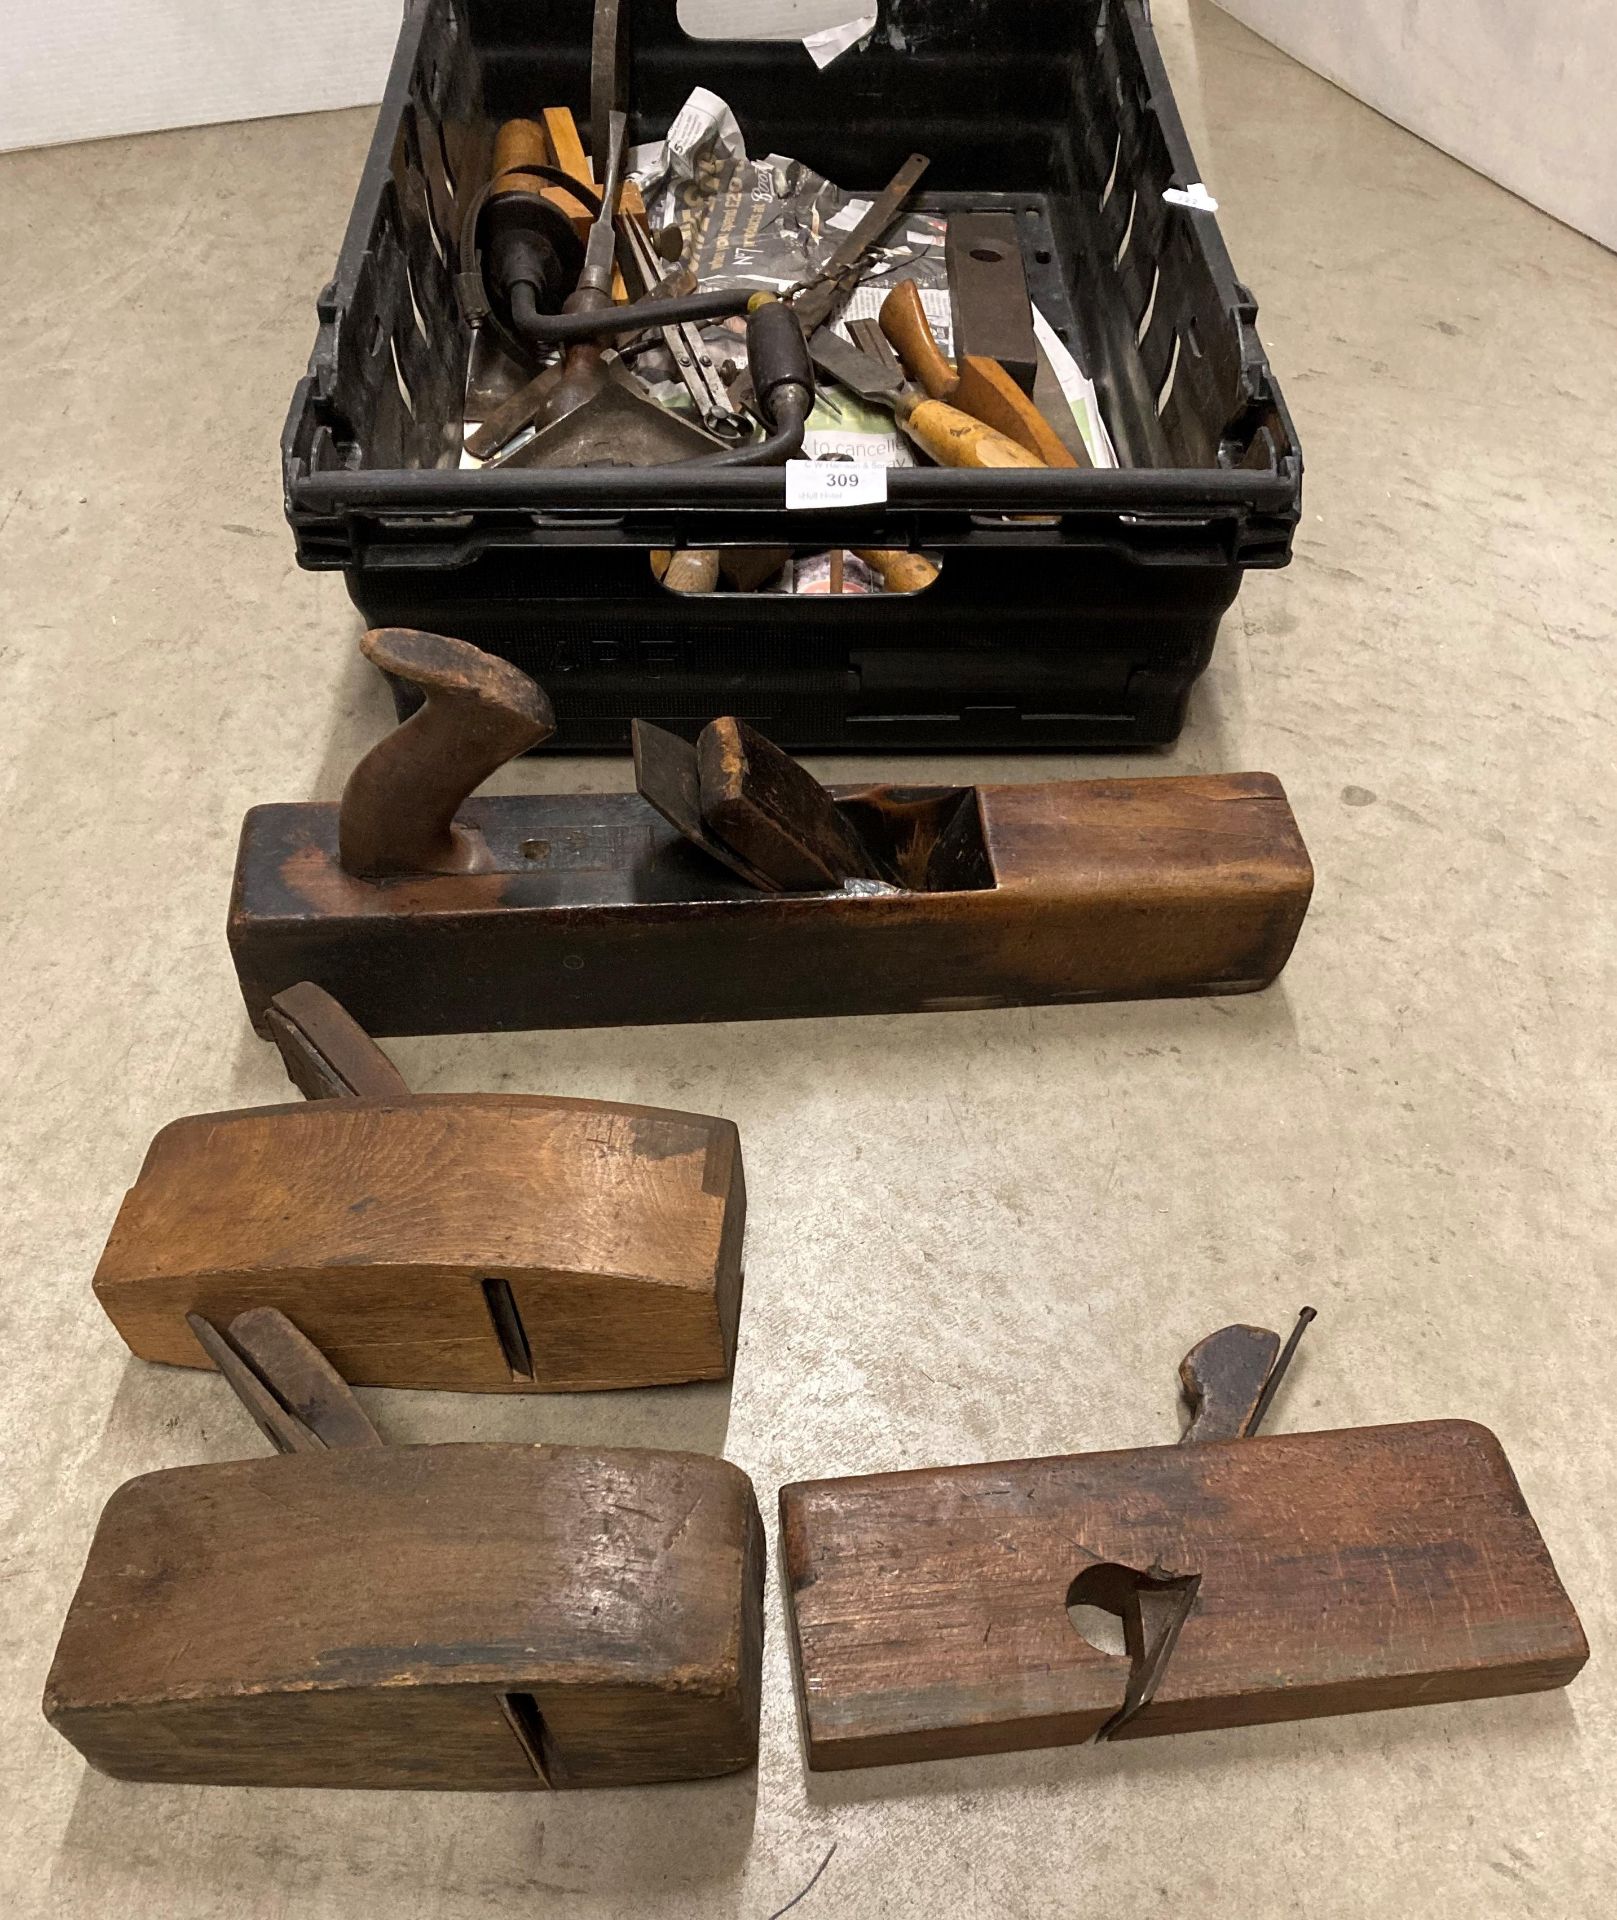 Contents to crate - assorted wood working tools including box planes, bit and brace, chisels, - Image 2 of 3